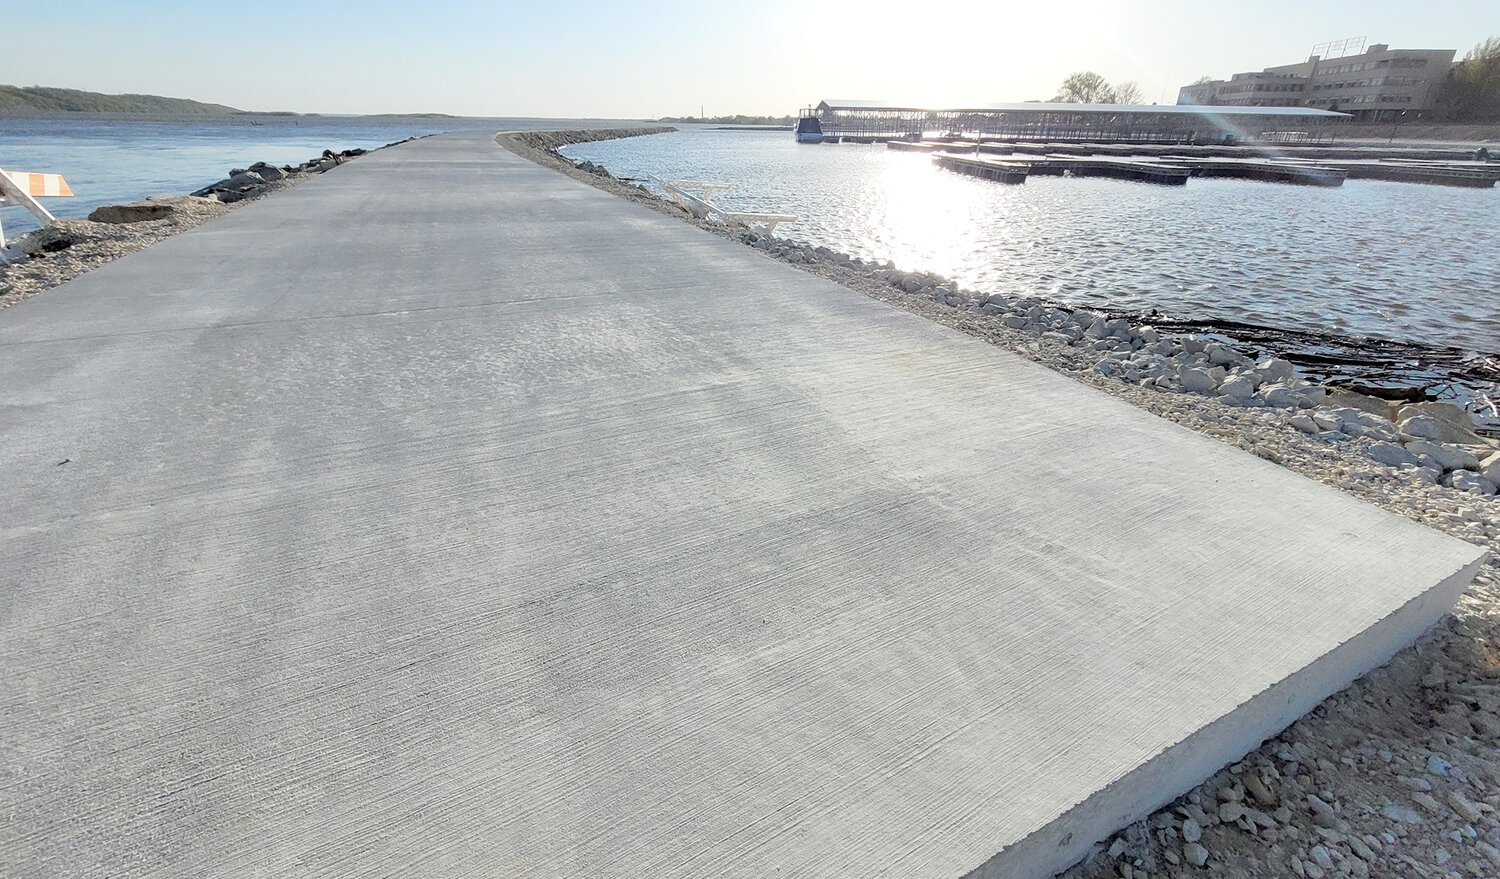 This vantage point shows the sun reflecting off the marina pool as the jetty wall wellness path stretches toward the river.